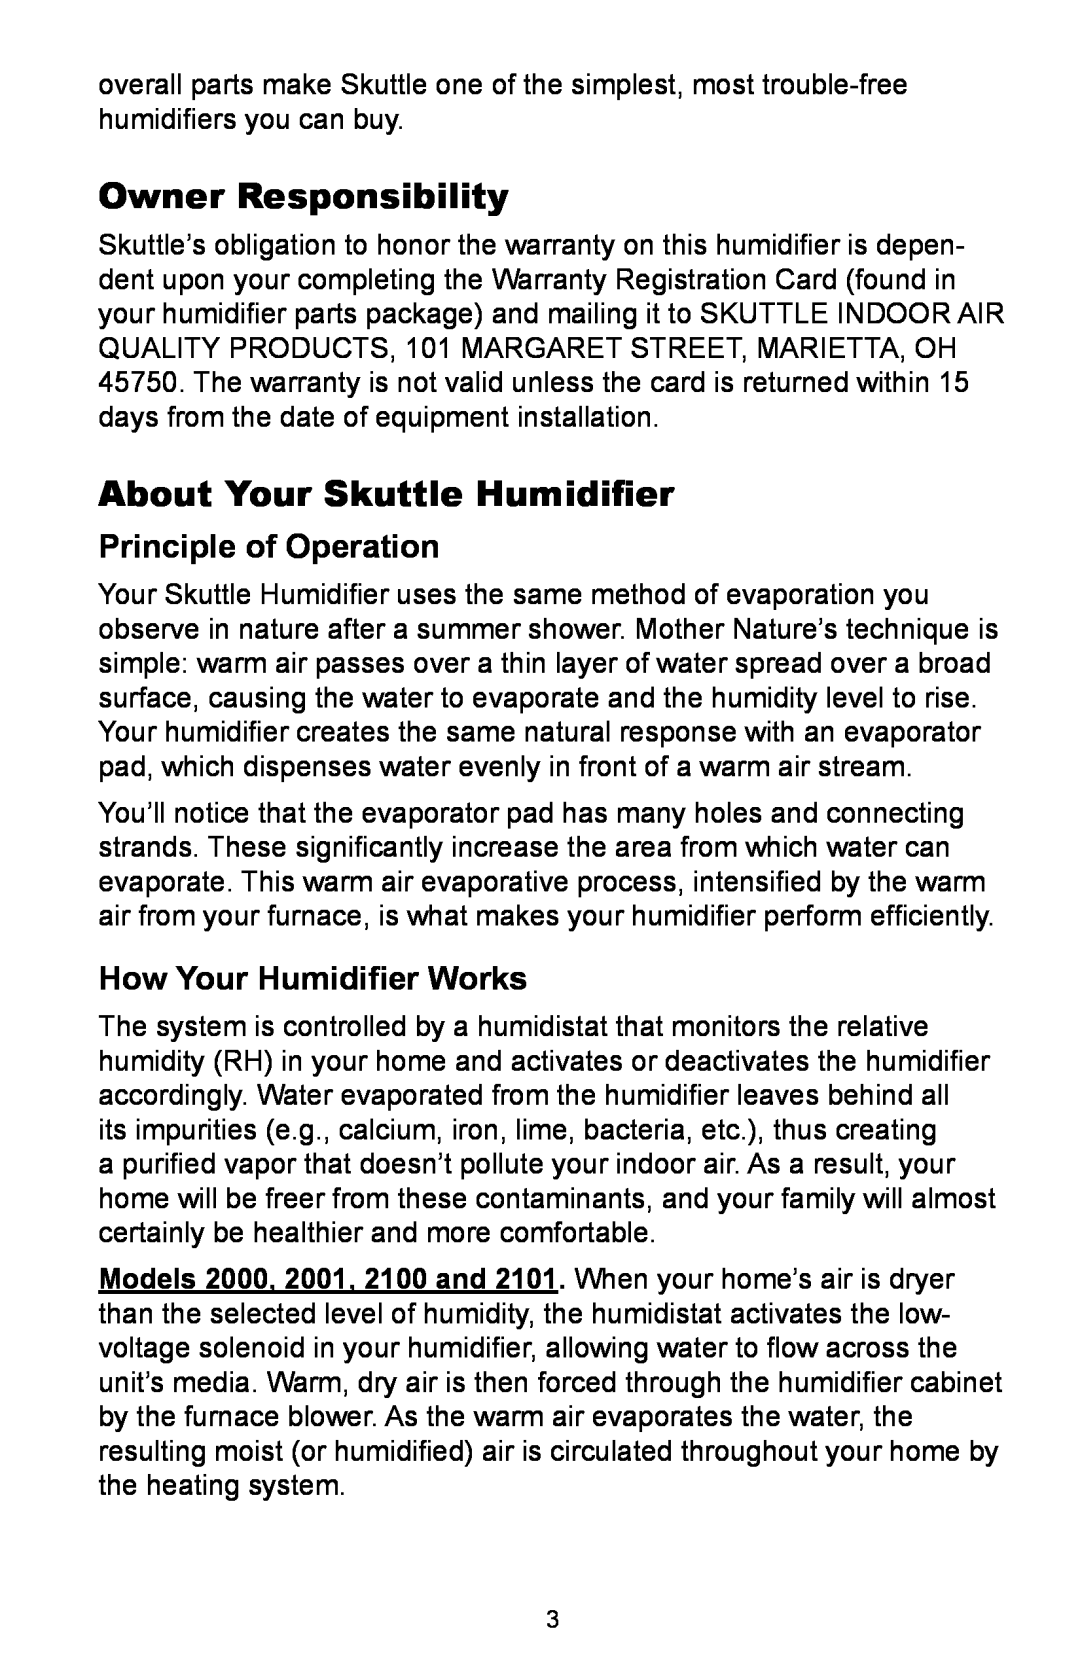 Skuttle Indoor Air Quality Products 2102, 2100 Owner Responsibility, About Your Skuttle Humidifier, Principle of Operation 